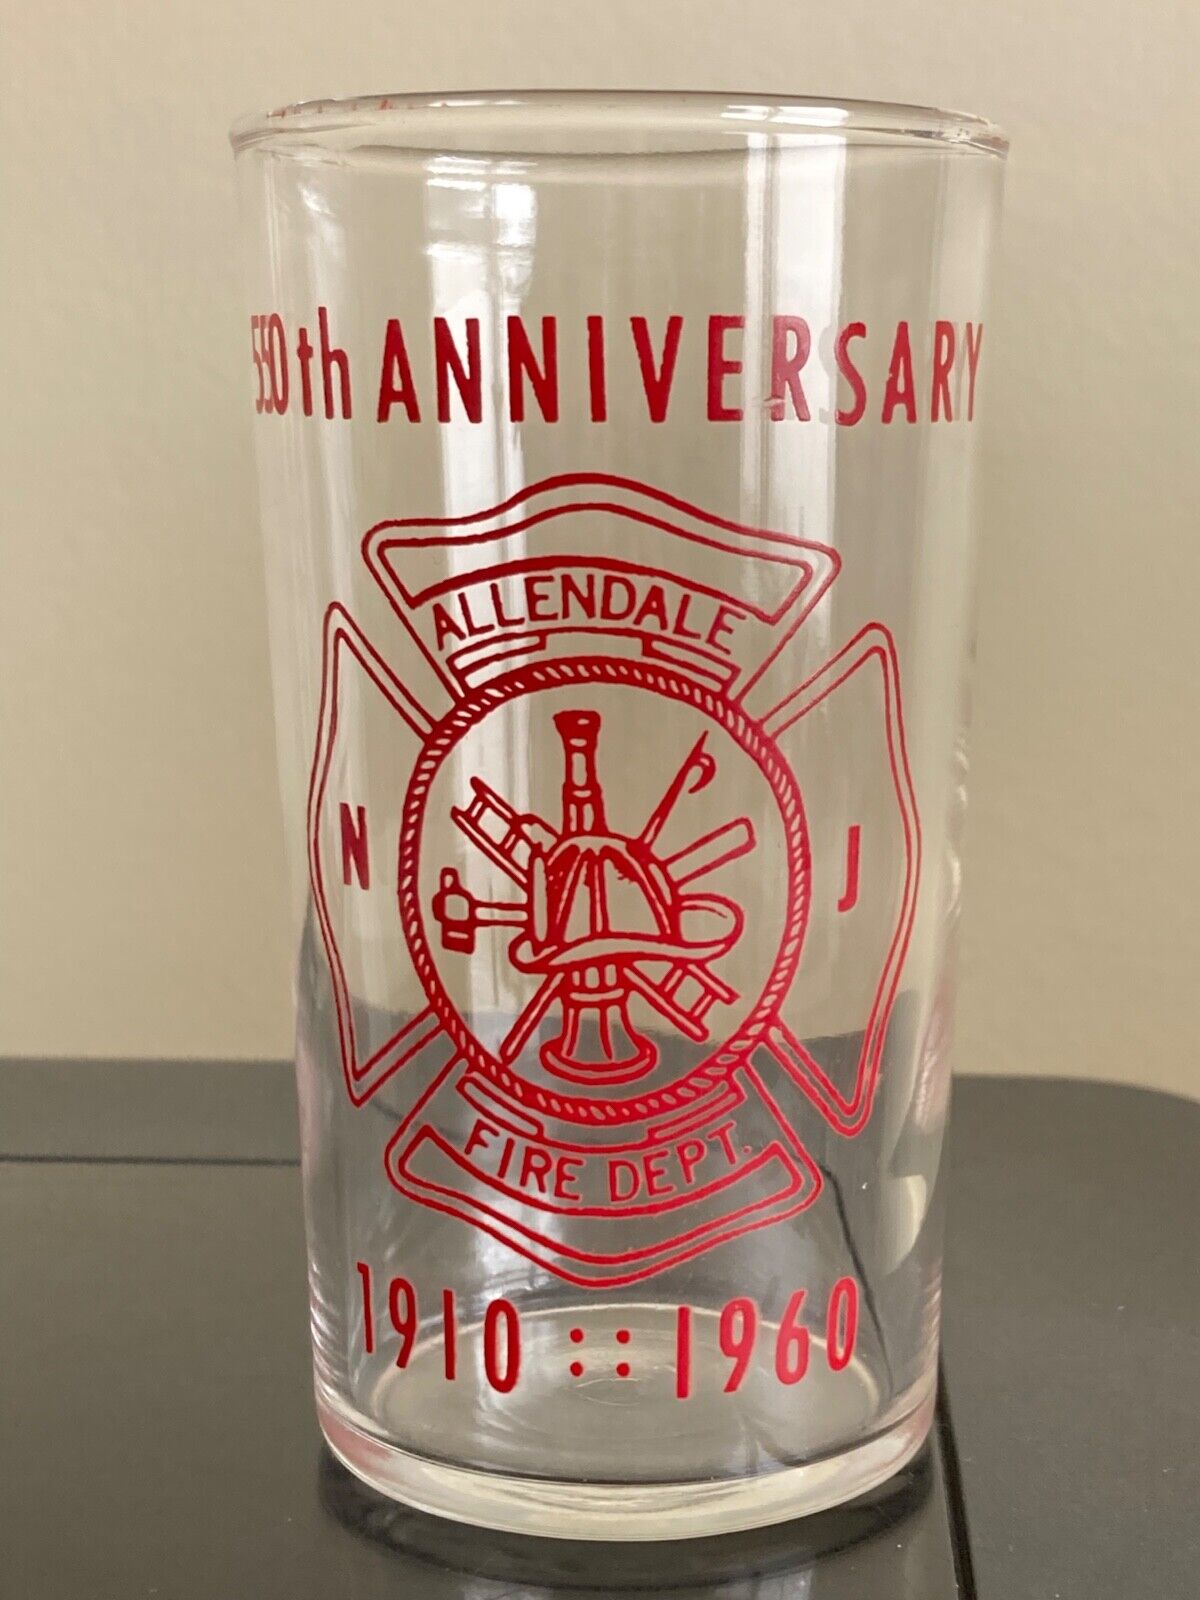 Allendale New Jersey Fire Dept Drinking Glass 50th Anniversary - 1960